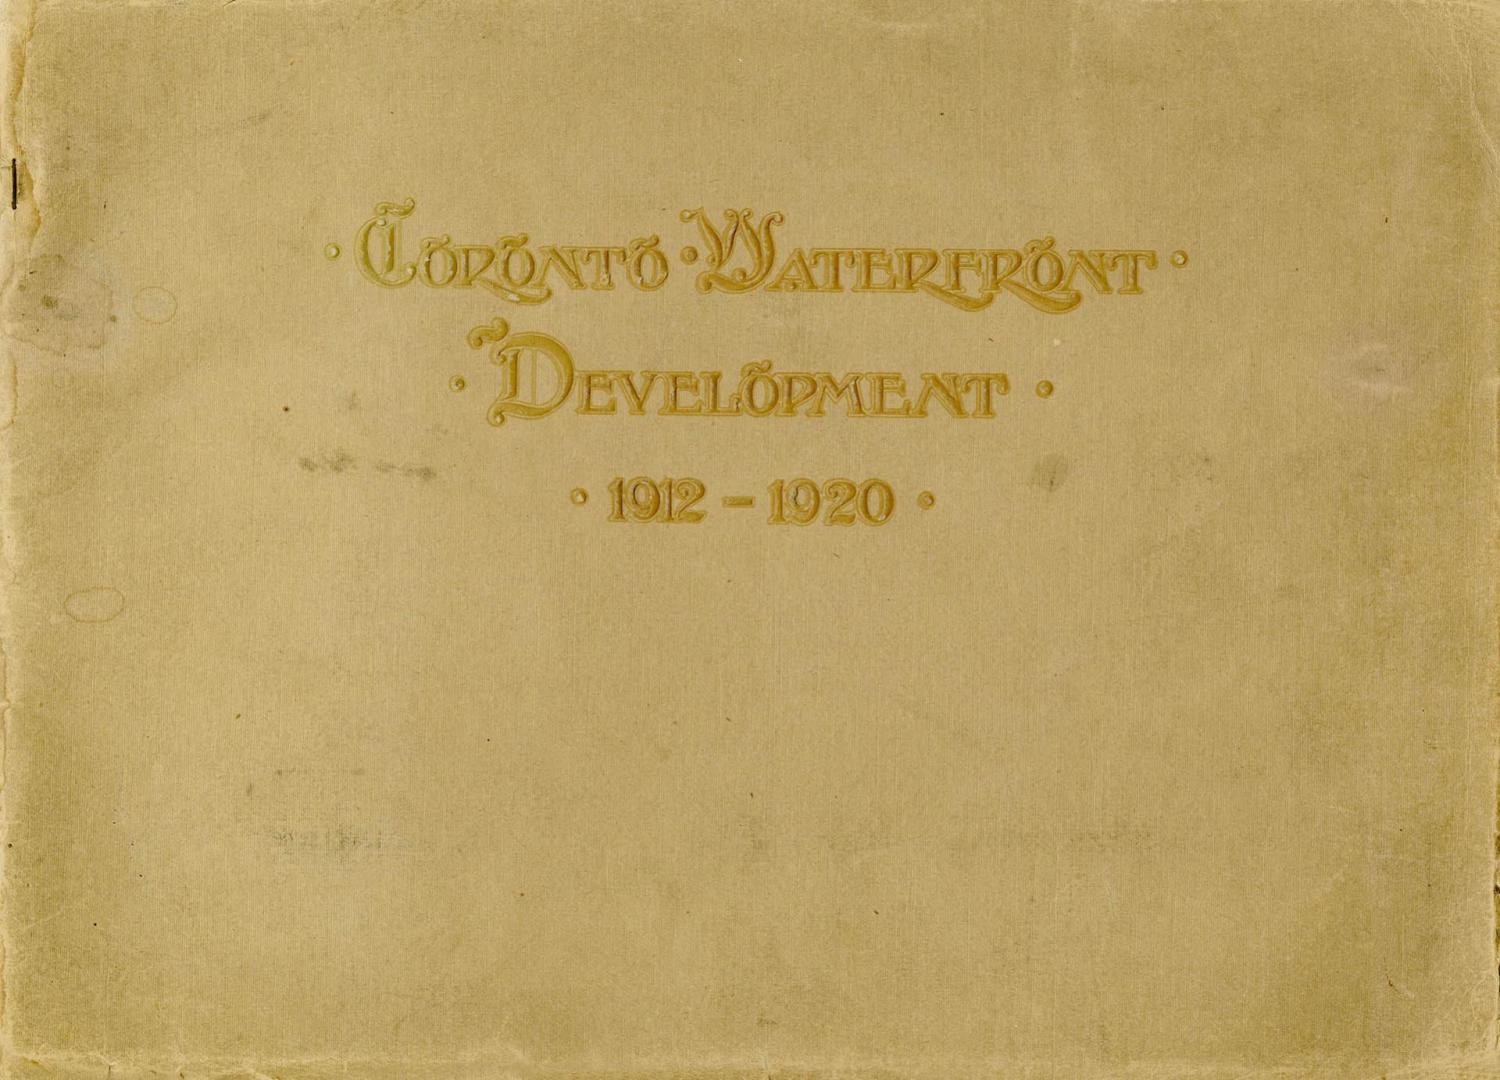 Image shows a cover page that reads: "Toronto Waterfront Development 1912-1920".